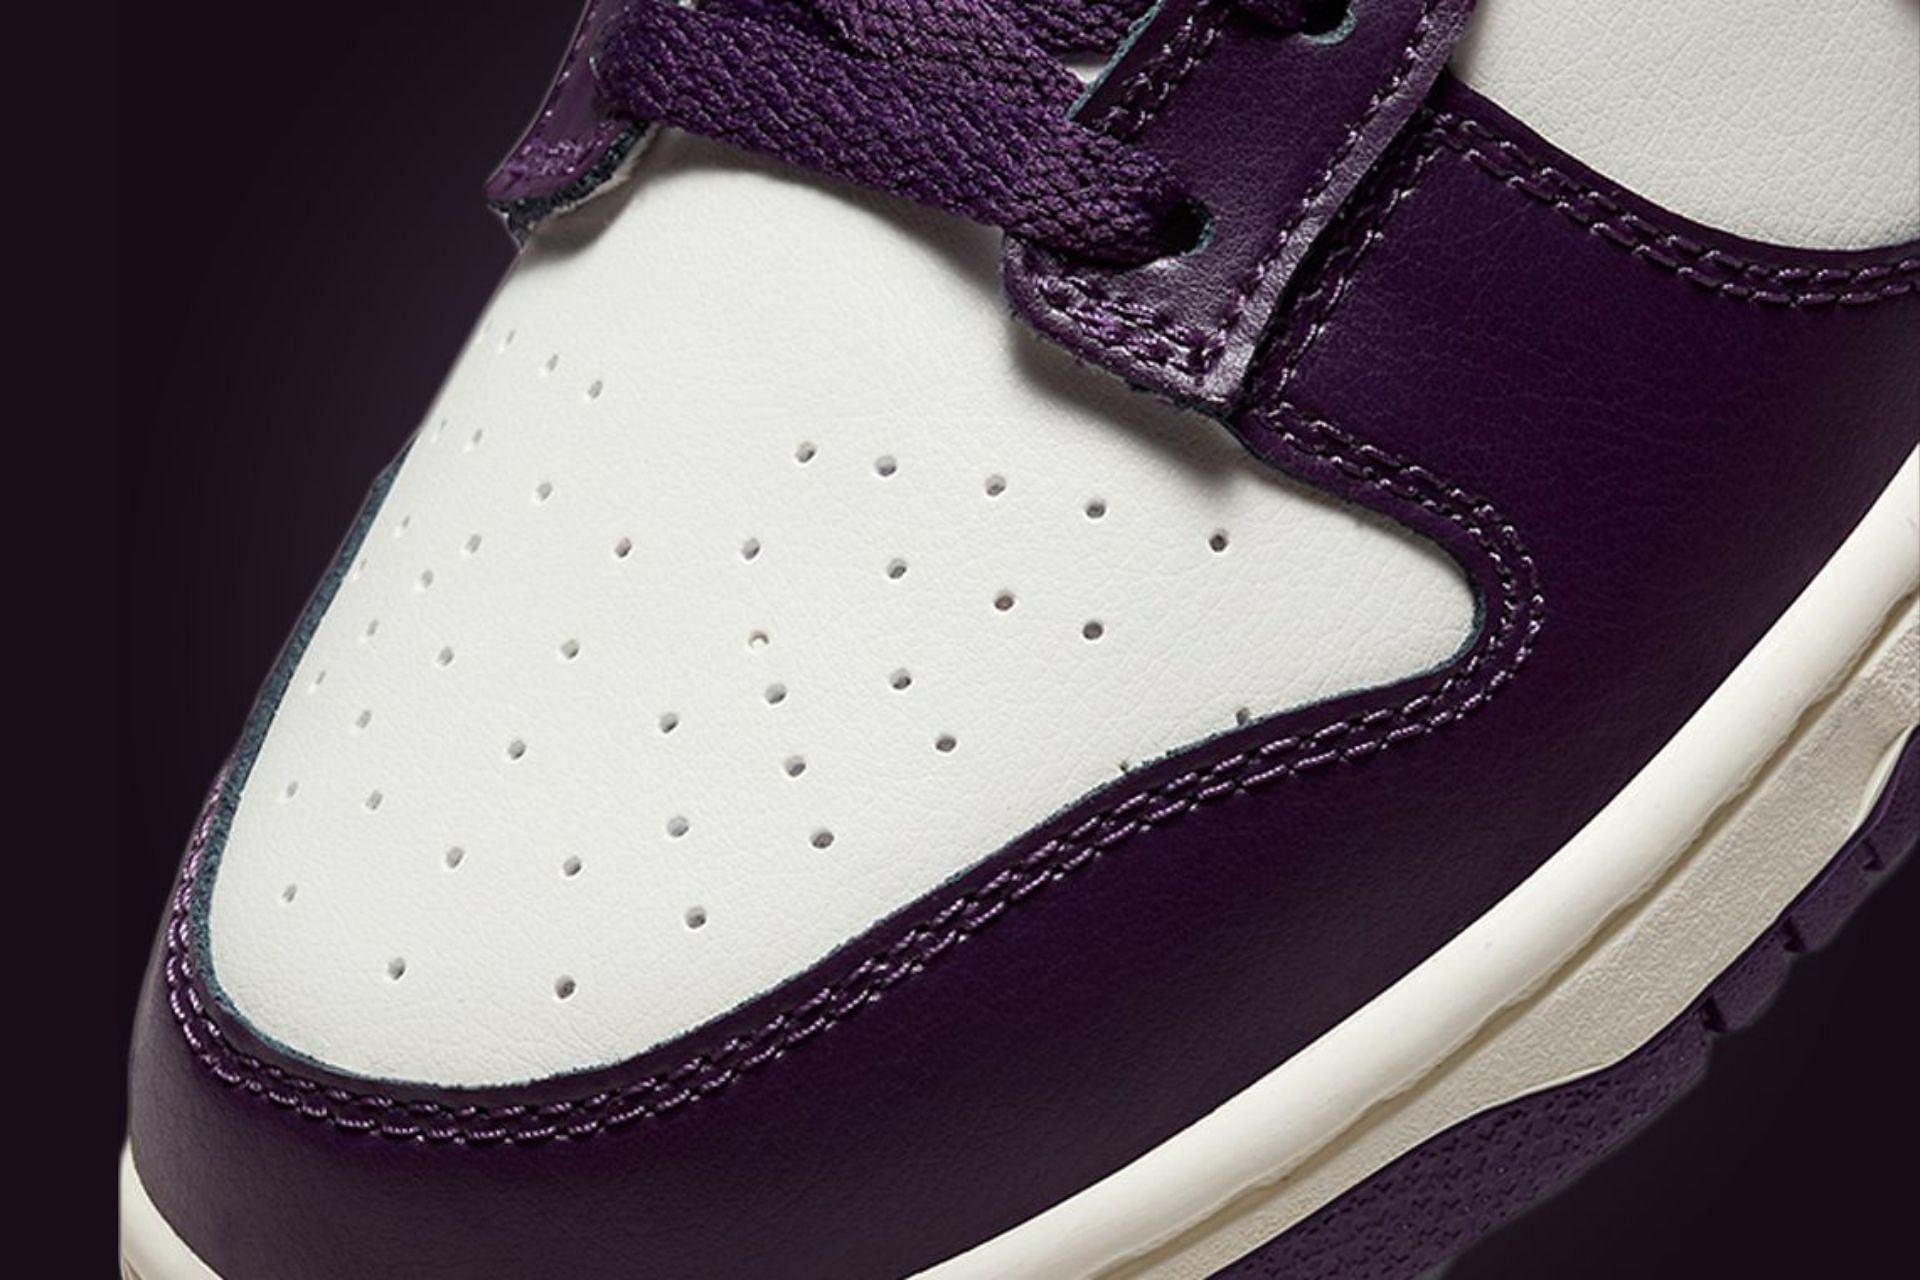 Take a closer look at the perforated toe of the shoe (Image via Nike)